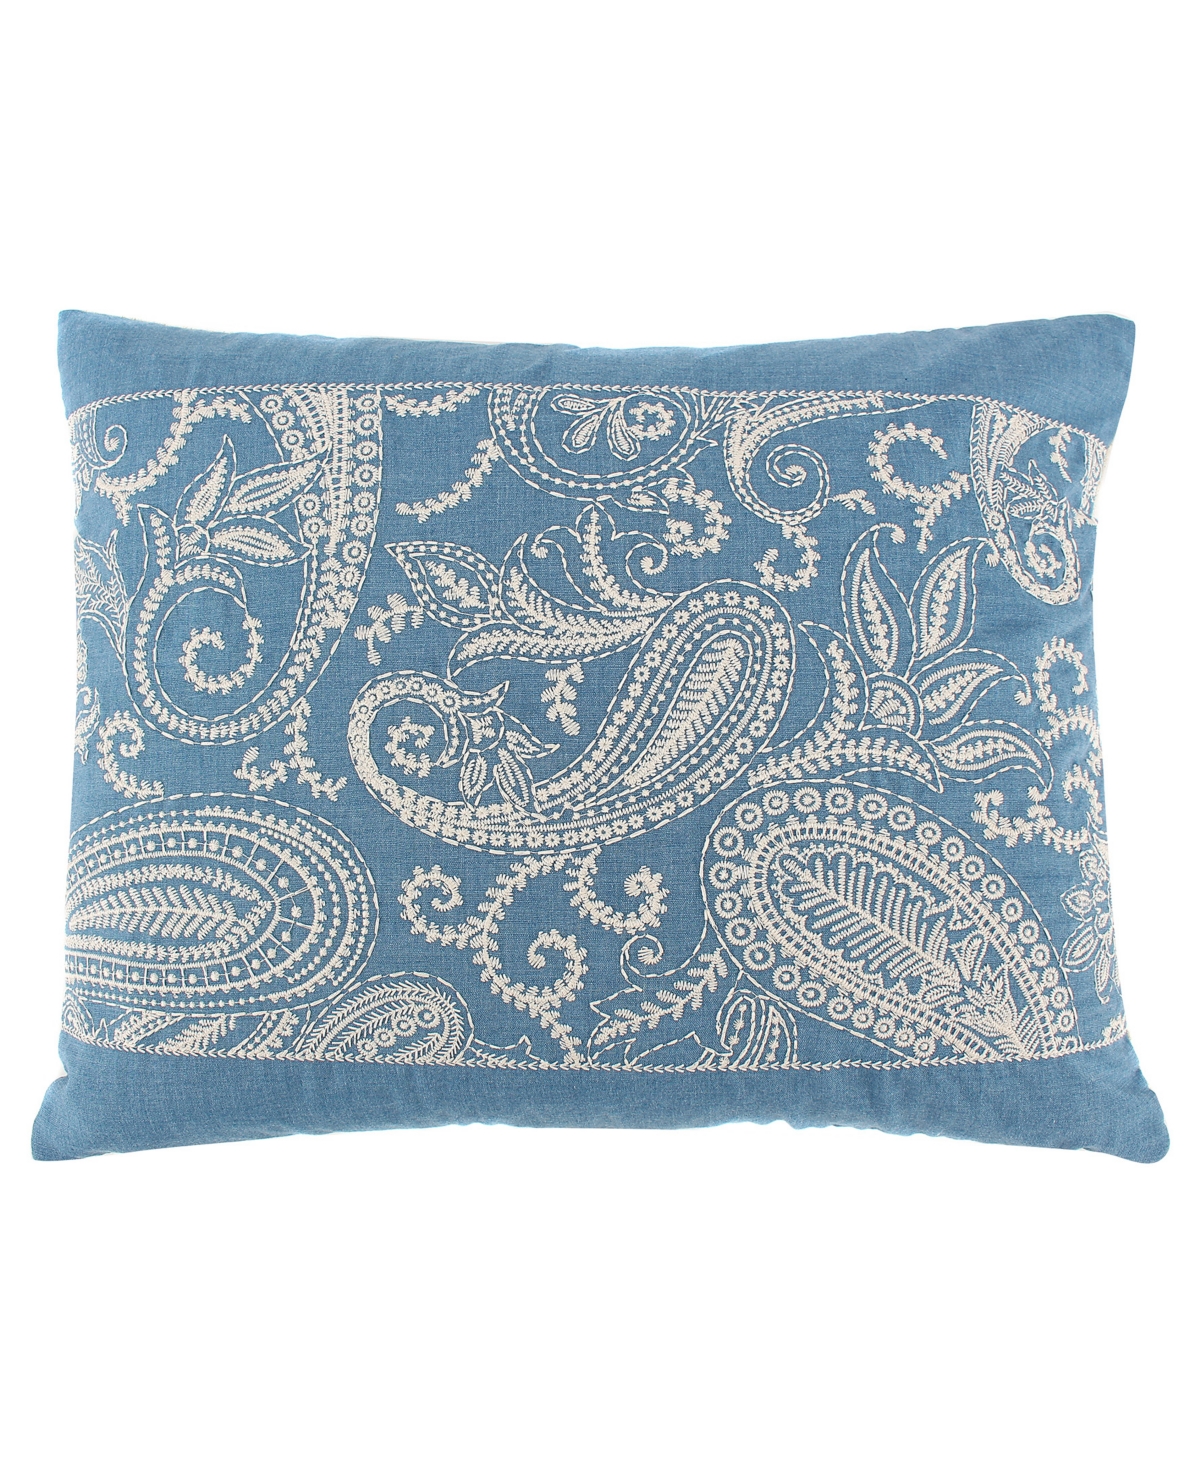 Levtex Khotan Embroidered Decorative Pillow, 18" X 14" In Blue